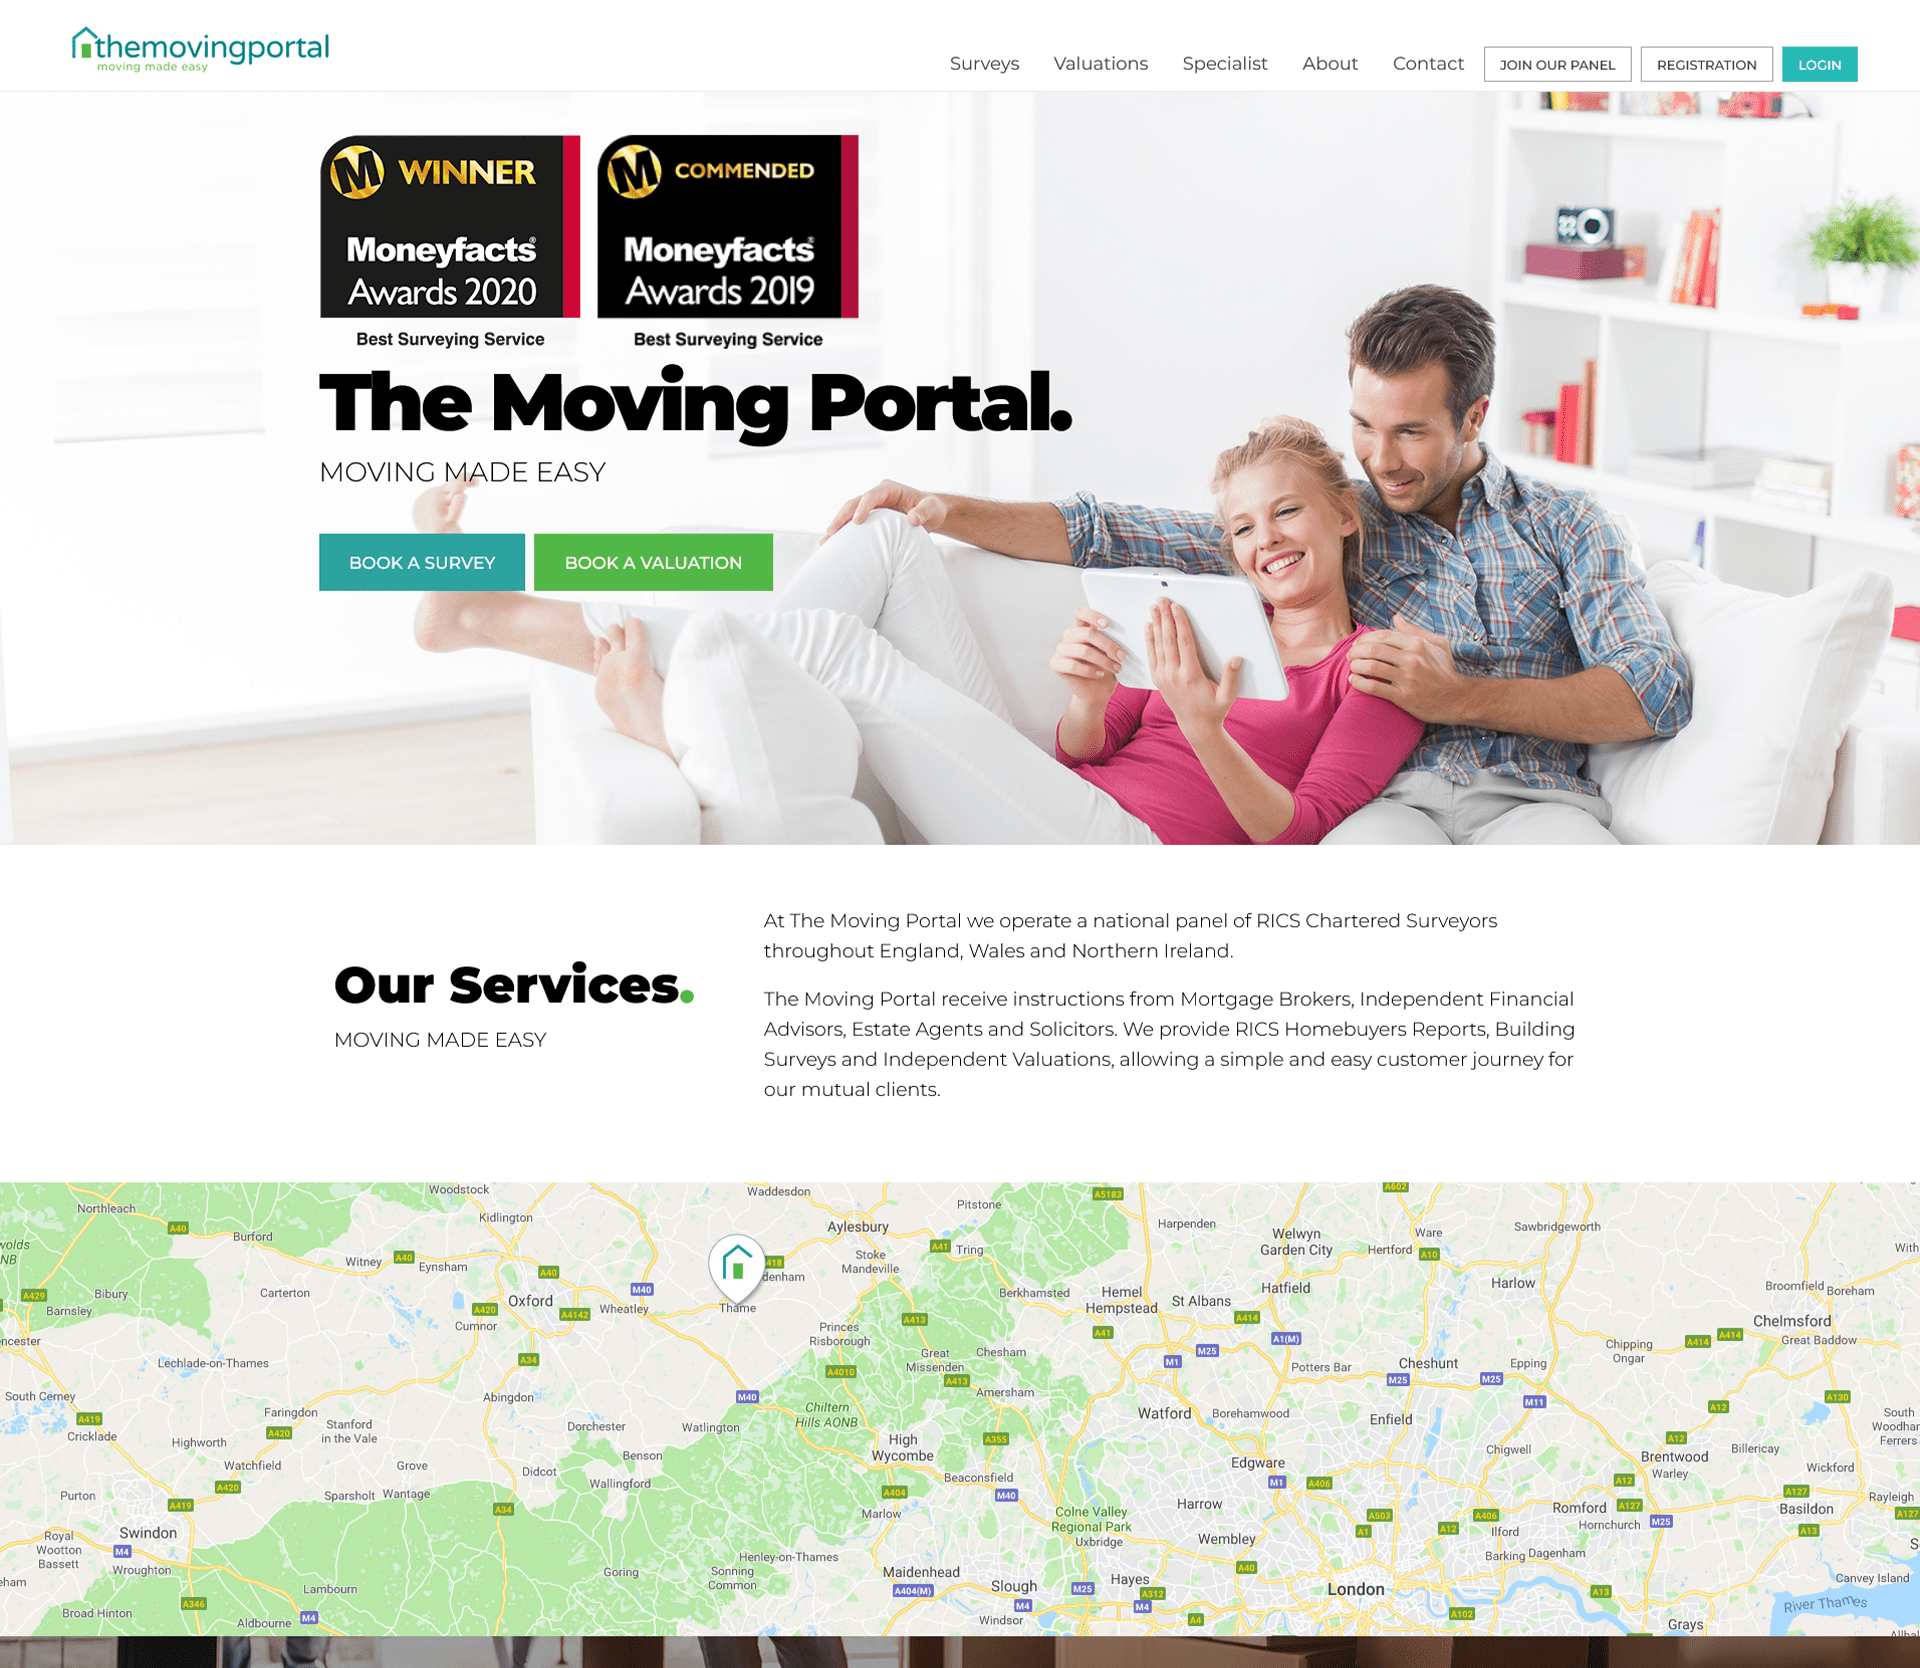 The Moving Portal